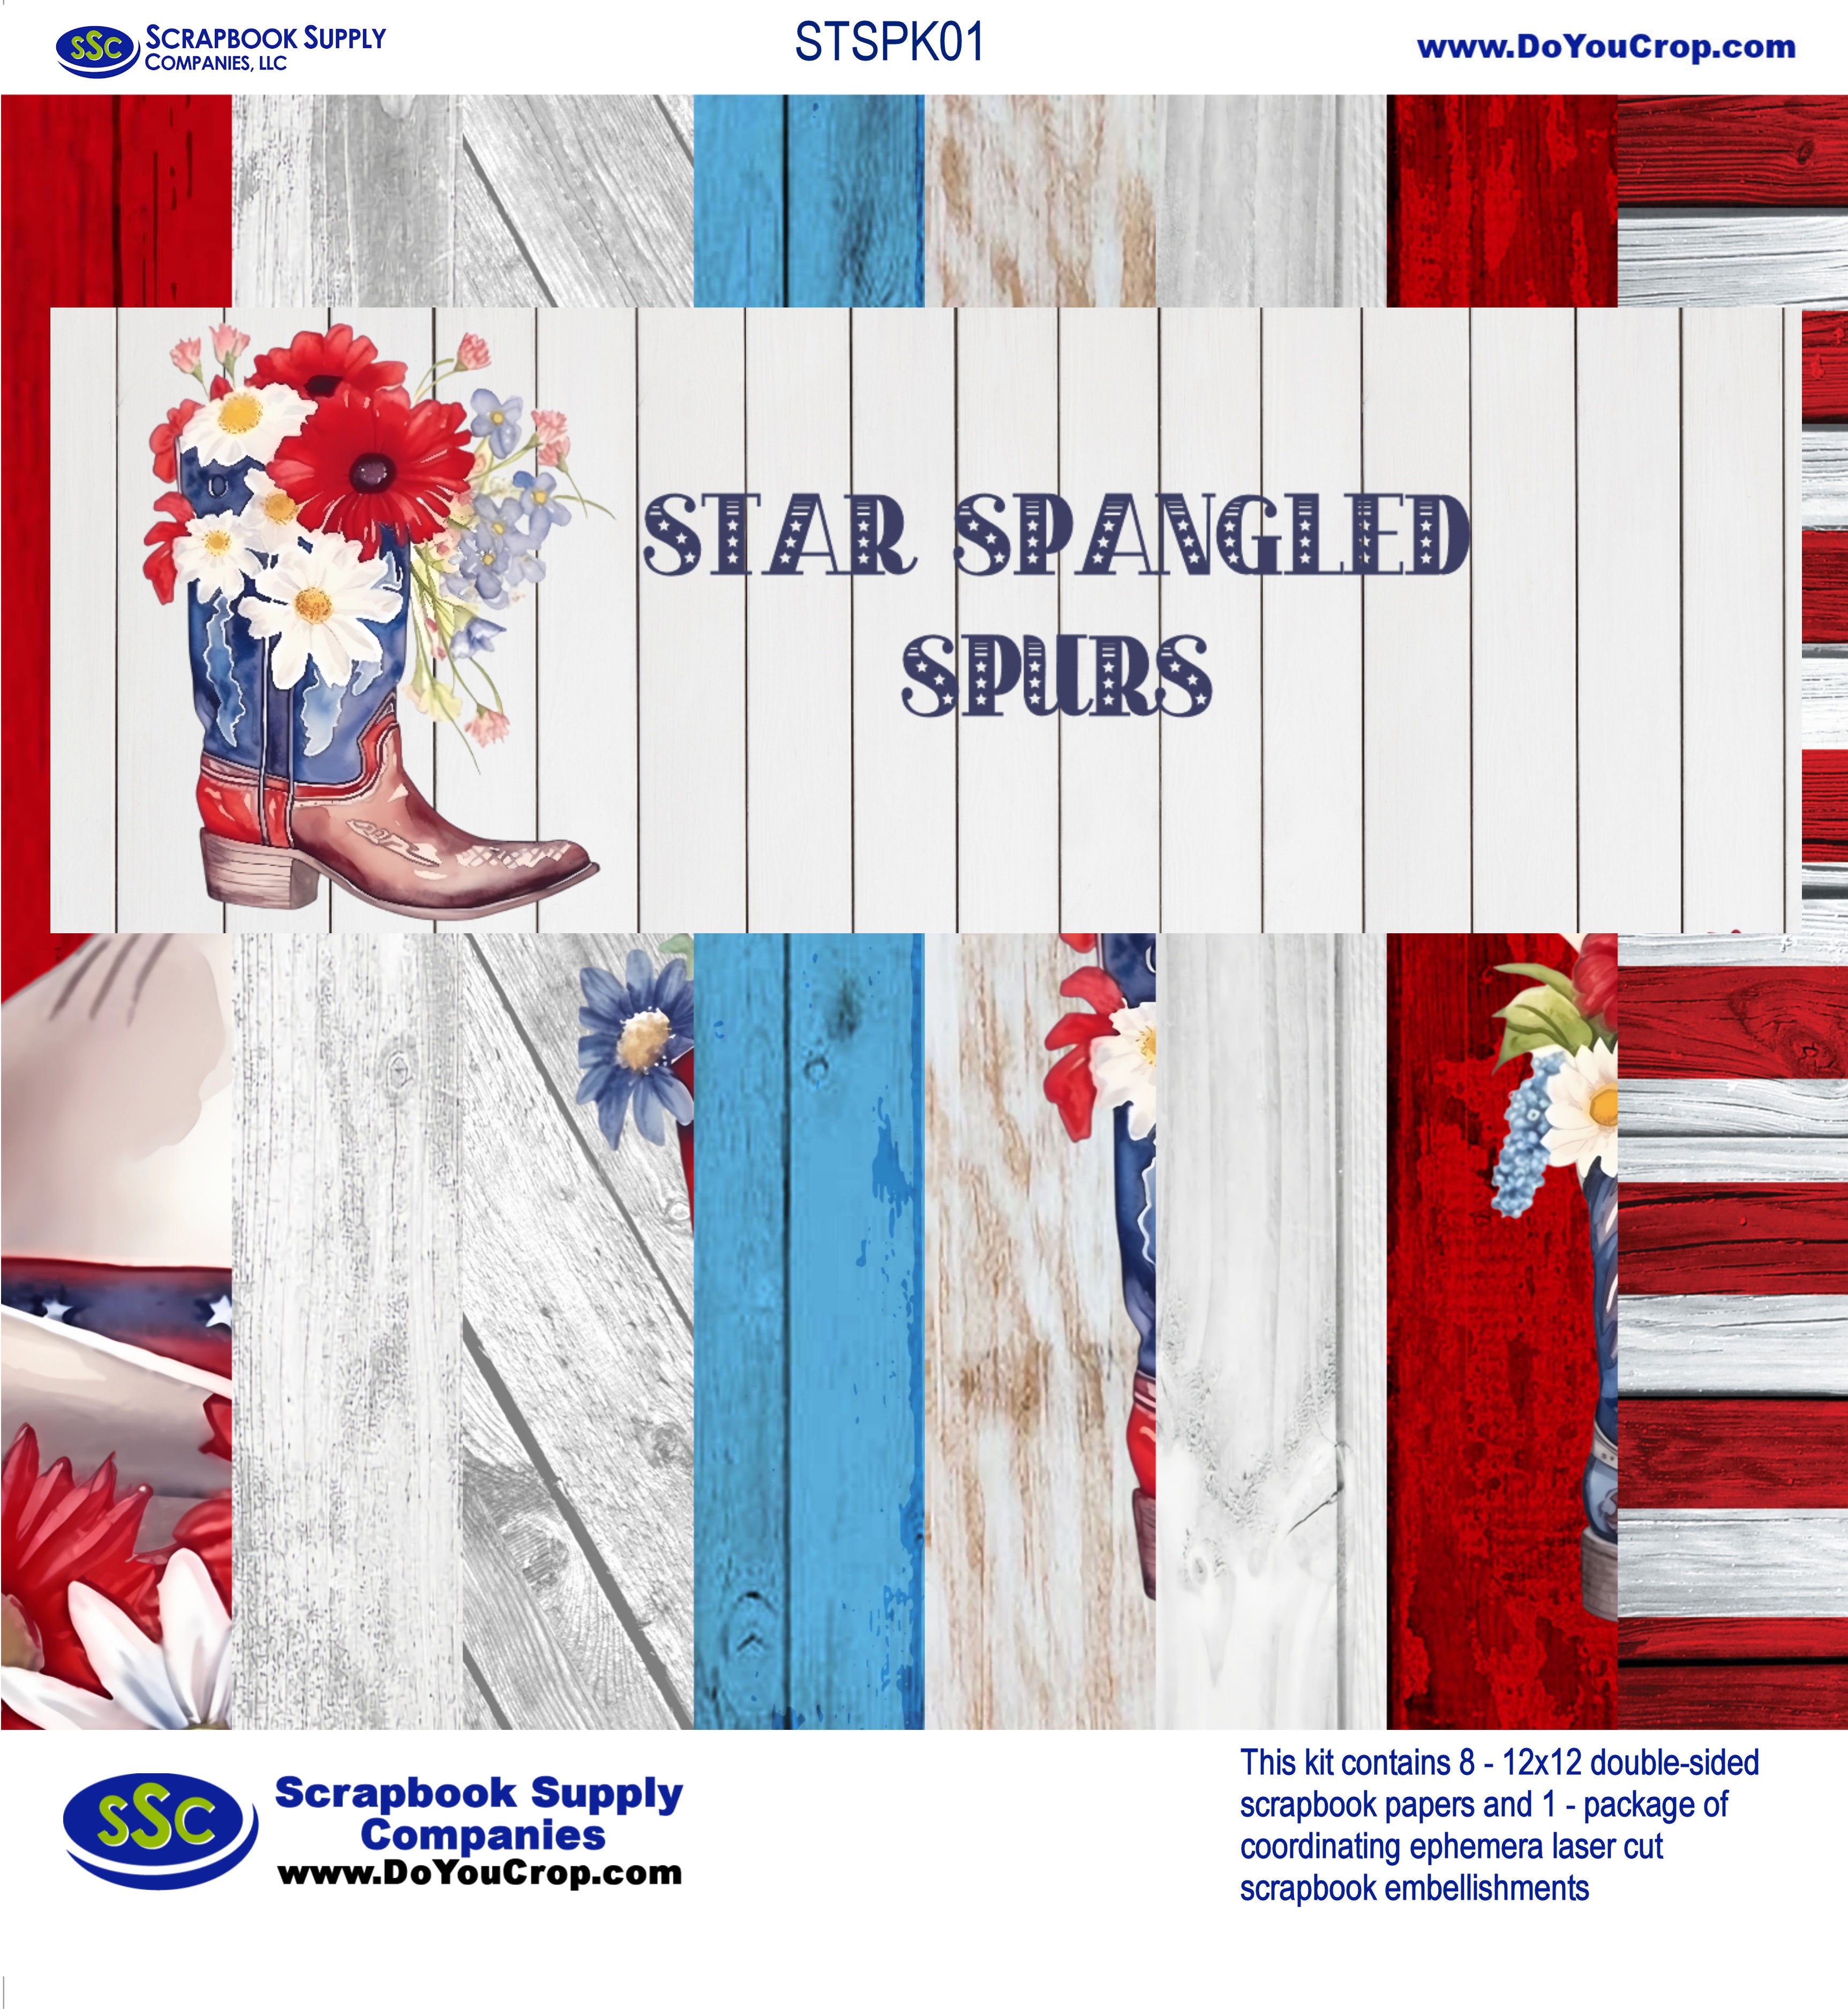 Star Spangled Spurs 12 x 12 Scrapbook Collection Kit by SSC Designs